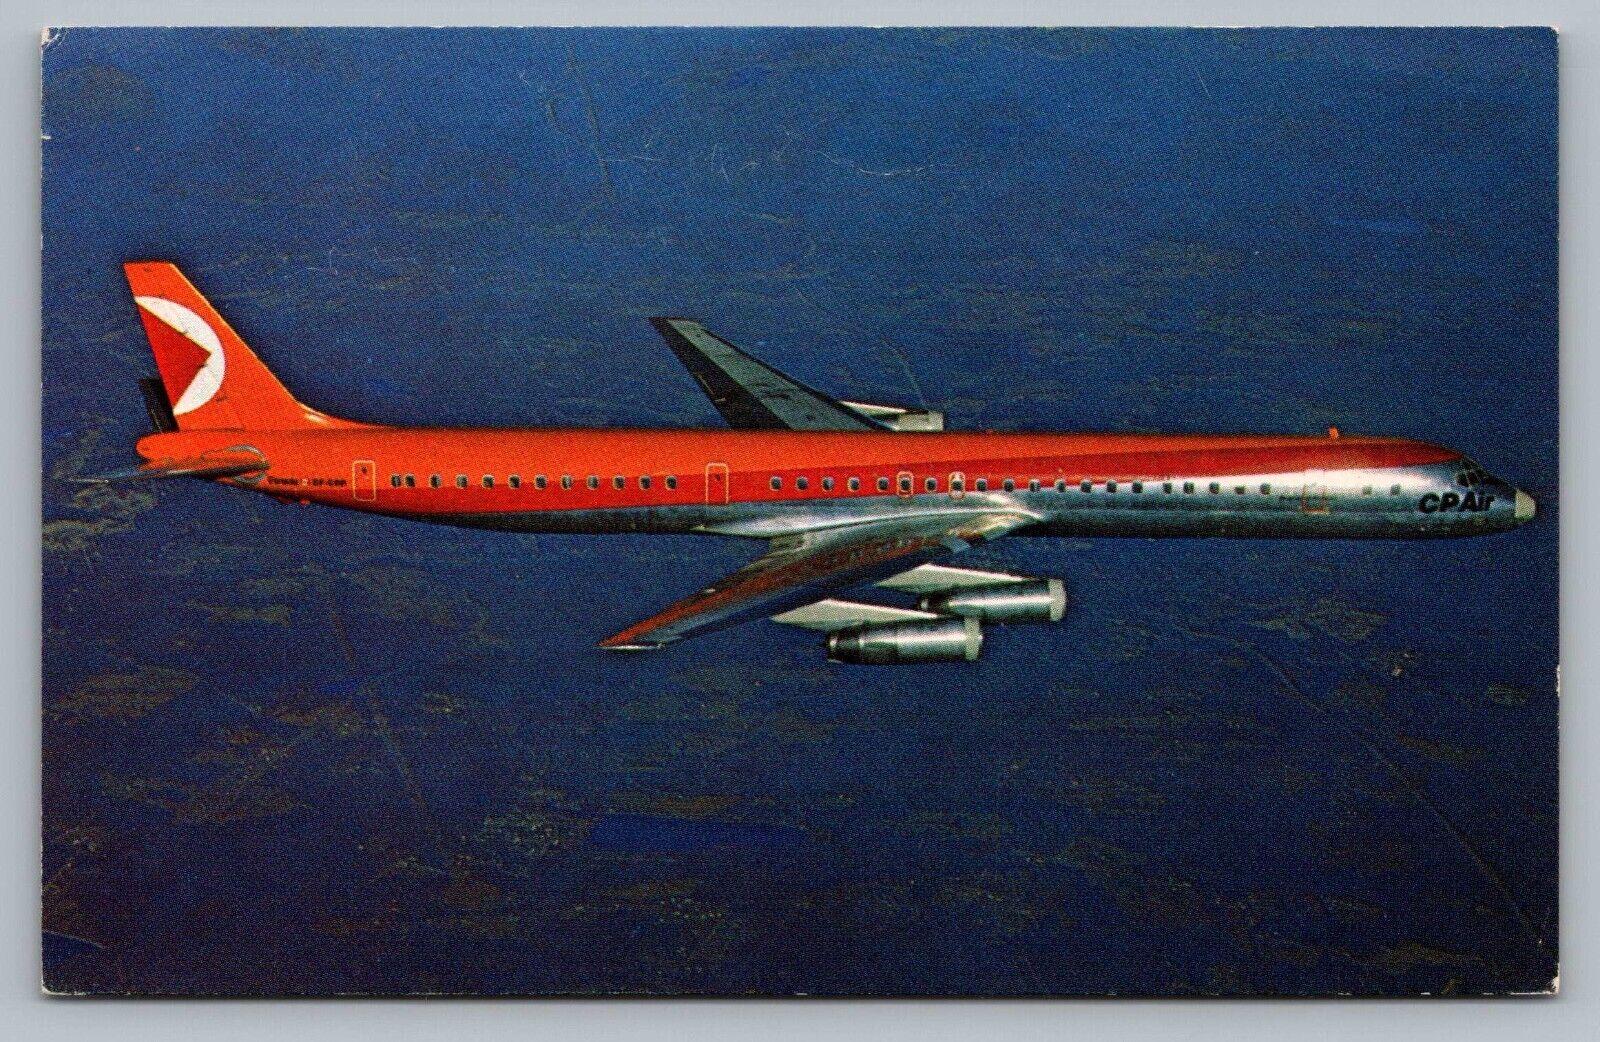 CP Air Airline DC-8 Aircraft in Flight Aviation Airplane Vintage Postcard P5